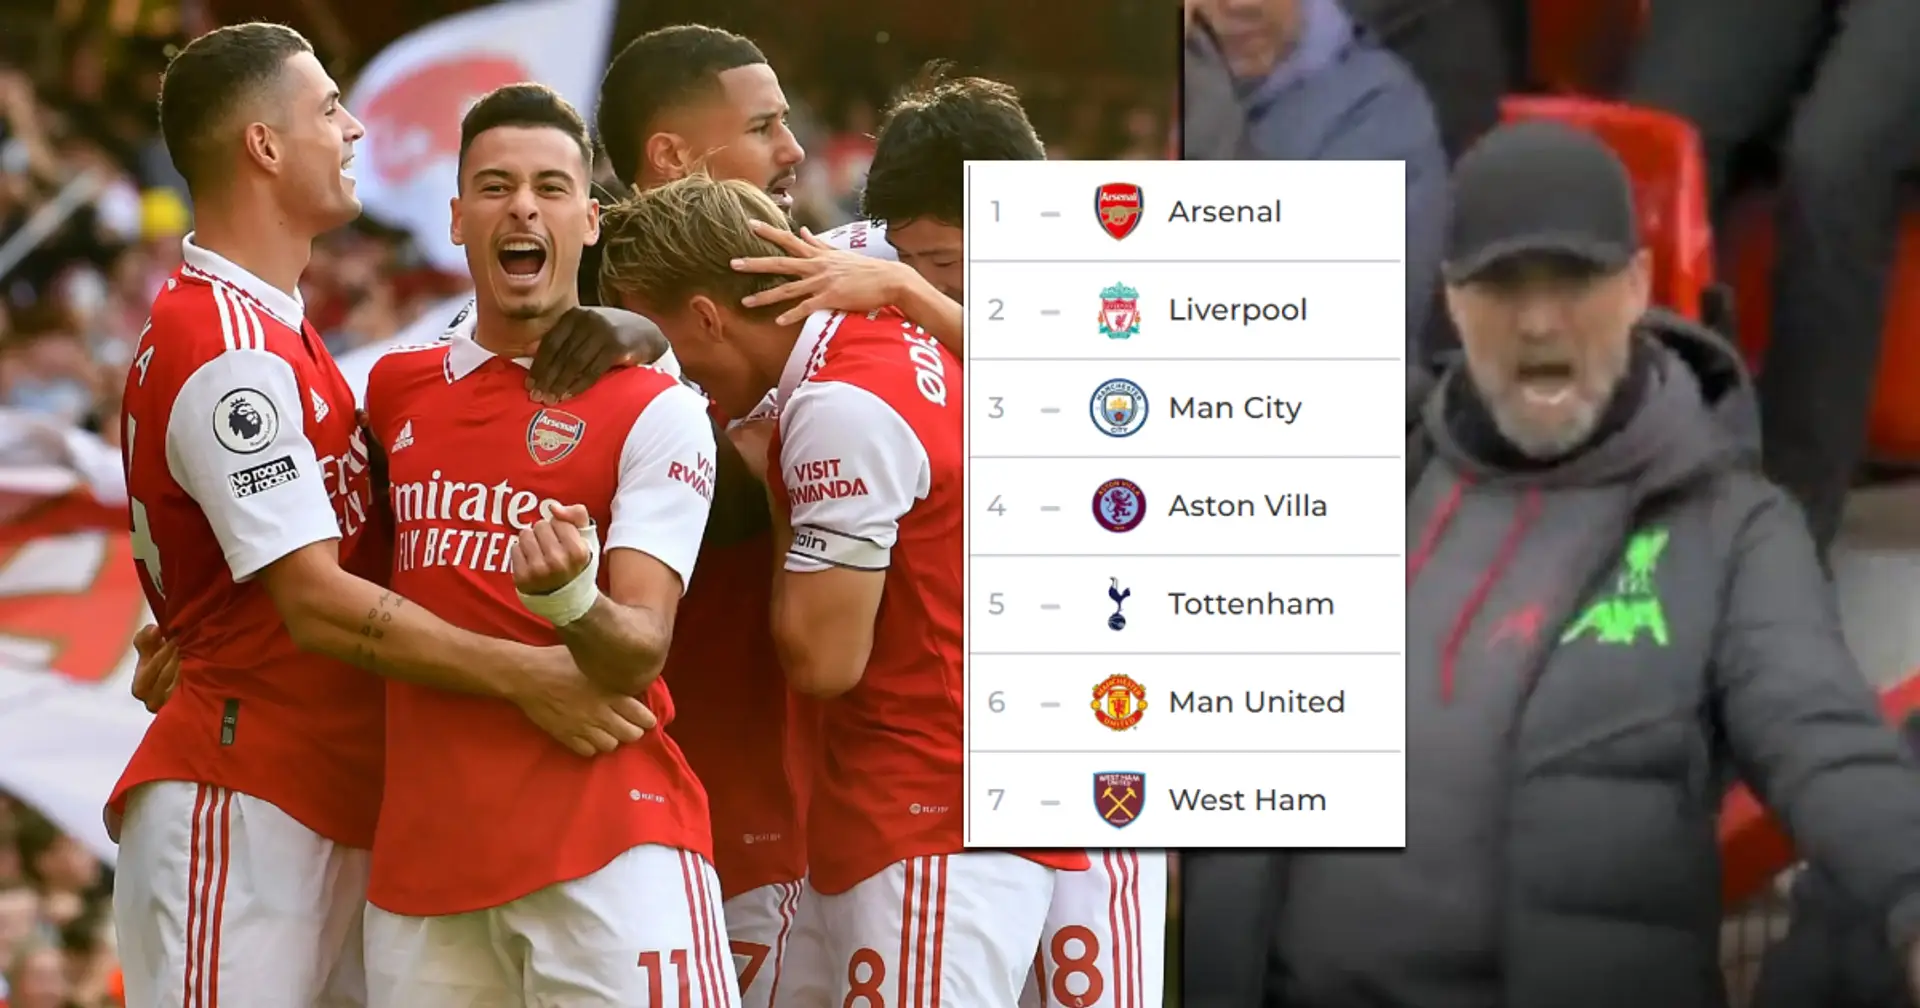 Arsenal TOP of Premier League as Man United hold Liverpool to a draw